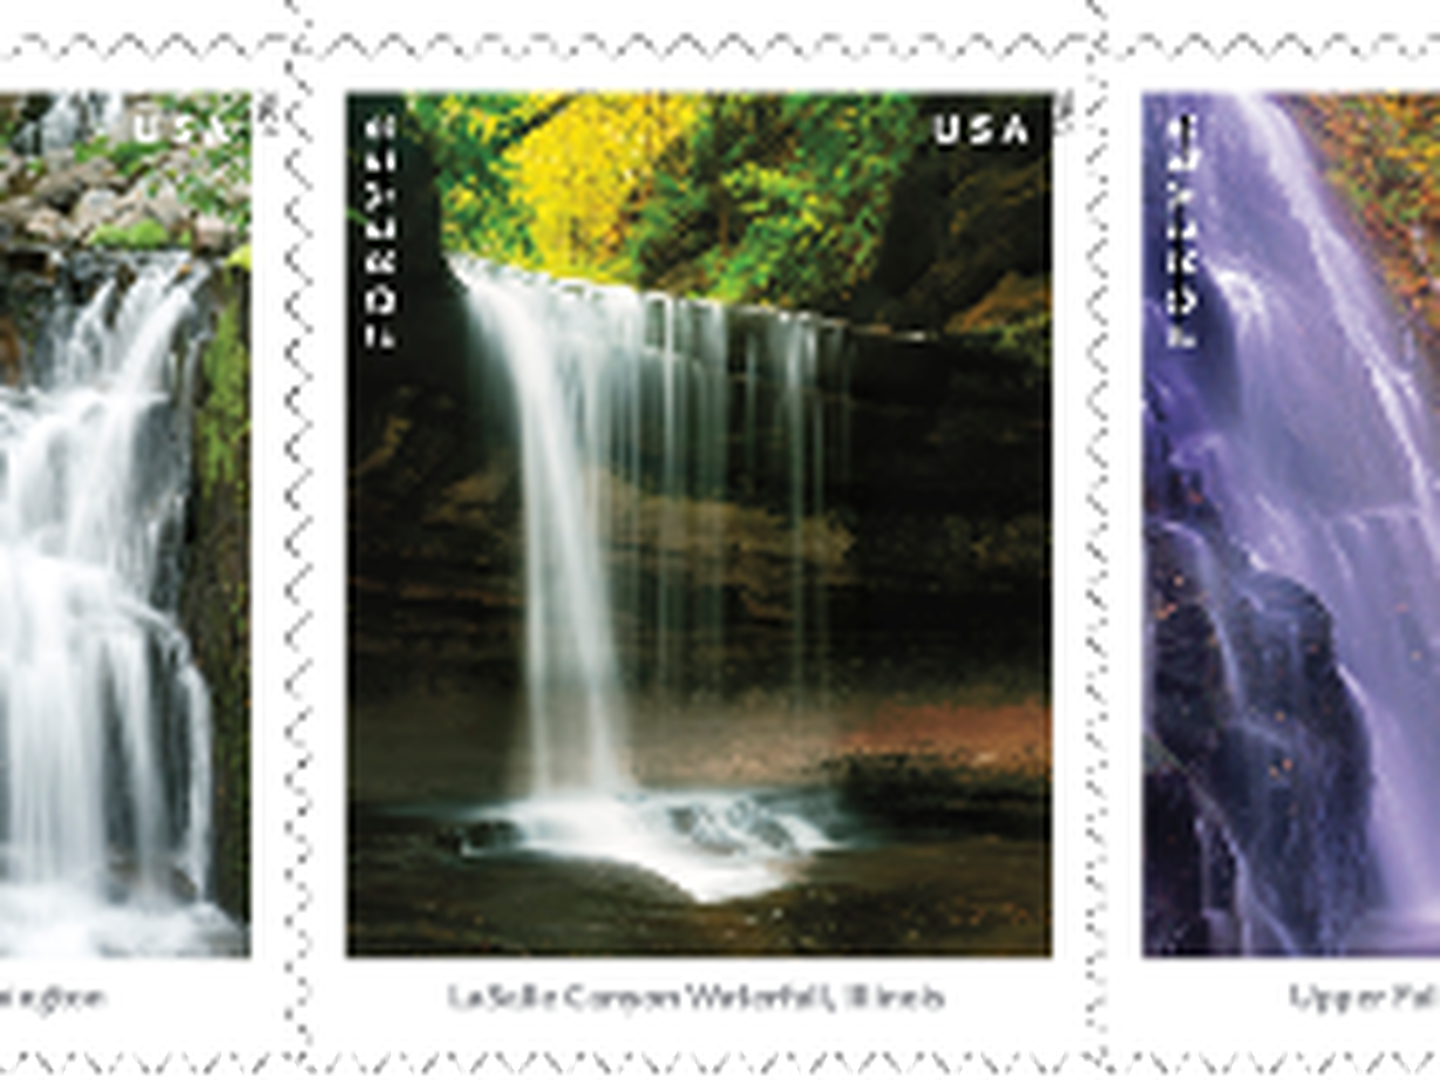 Starved Rock State Park's La Salle Canyon is one of 12 waterfalls in the United States Postal Service's stamp collection.